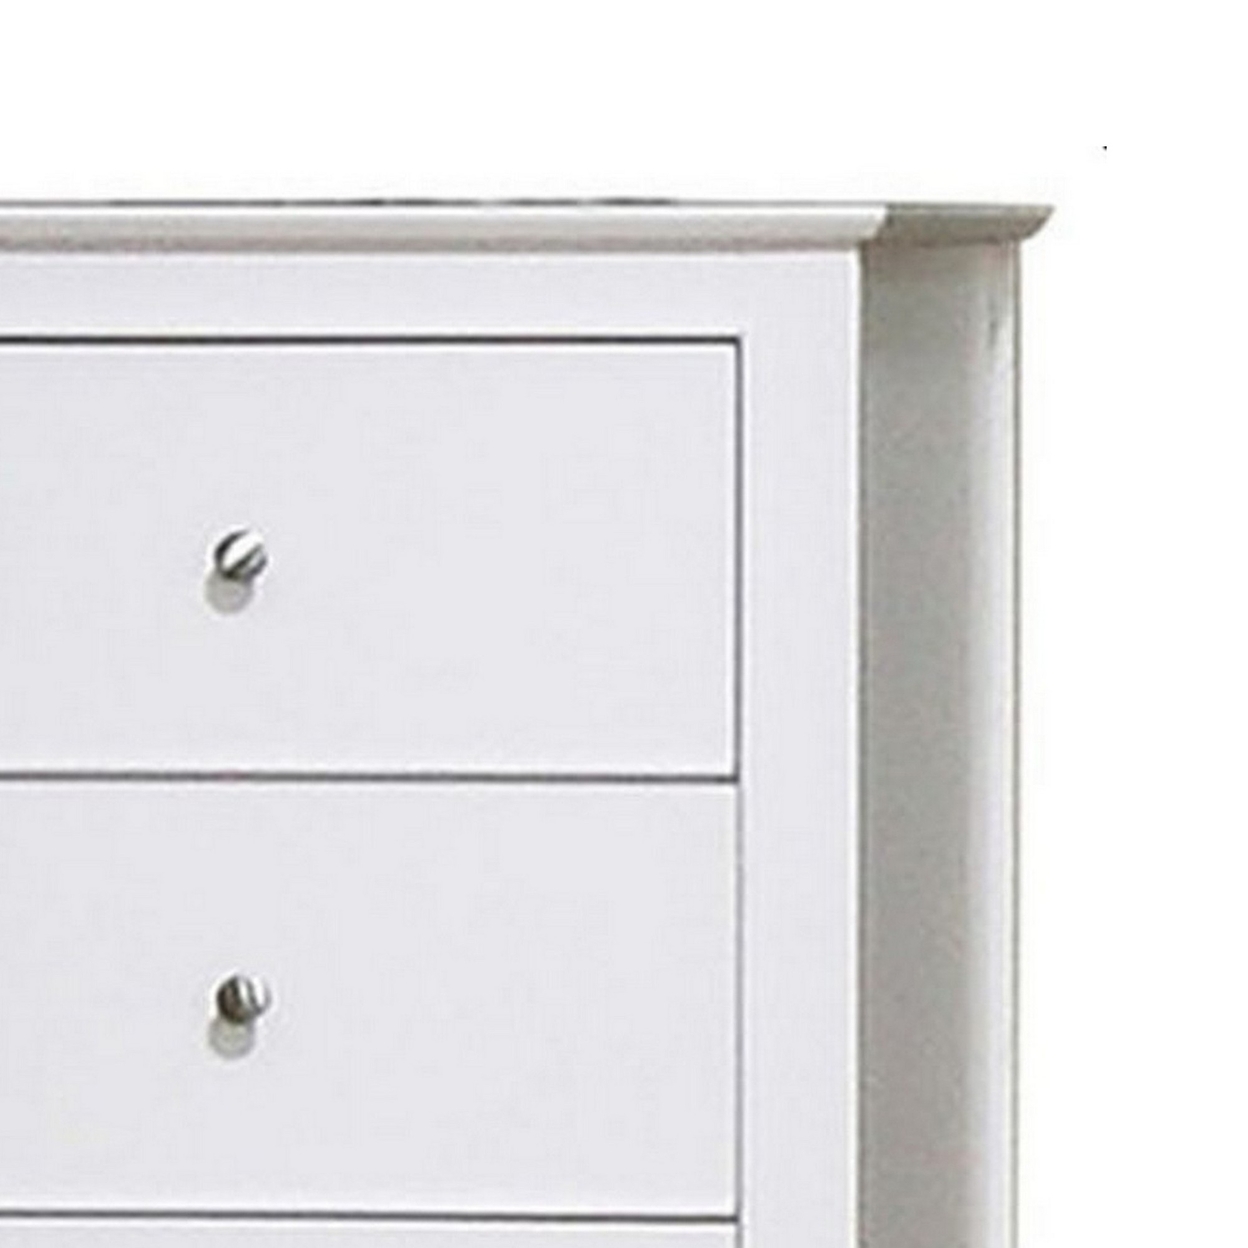 Nee 48 Inch Tall Dresser Chest, 5 Drawers With Silver Knobs, Matte White- Saltoro Sherpi